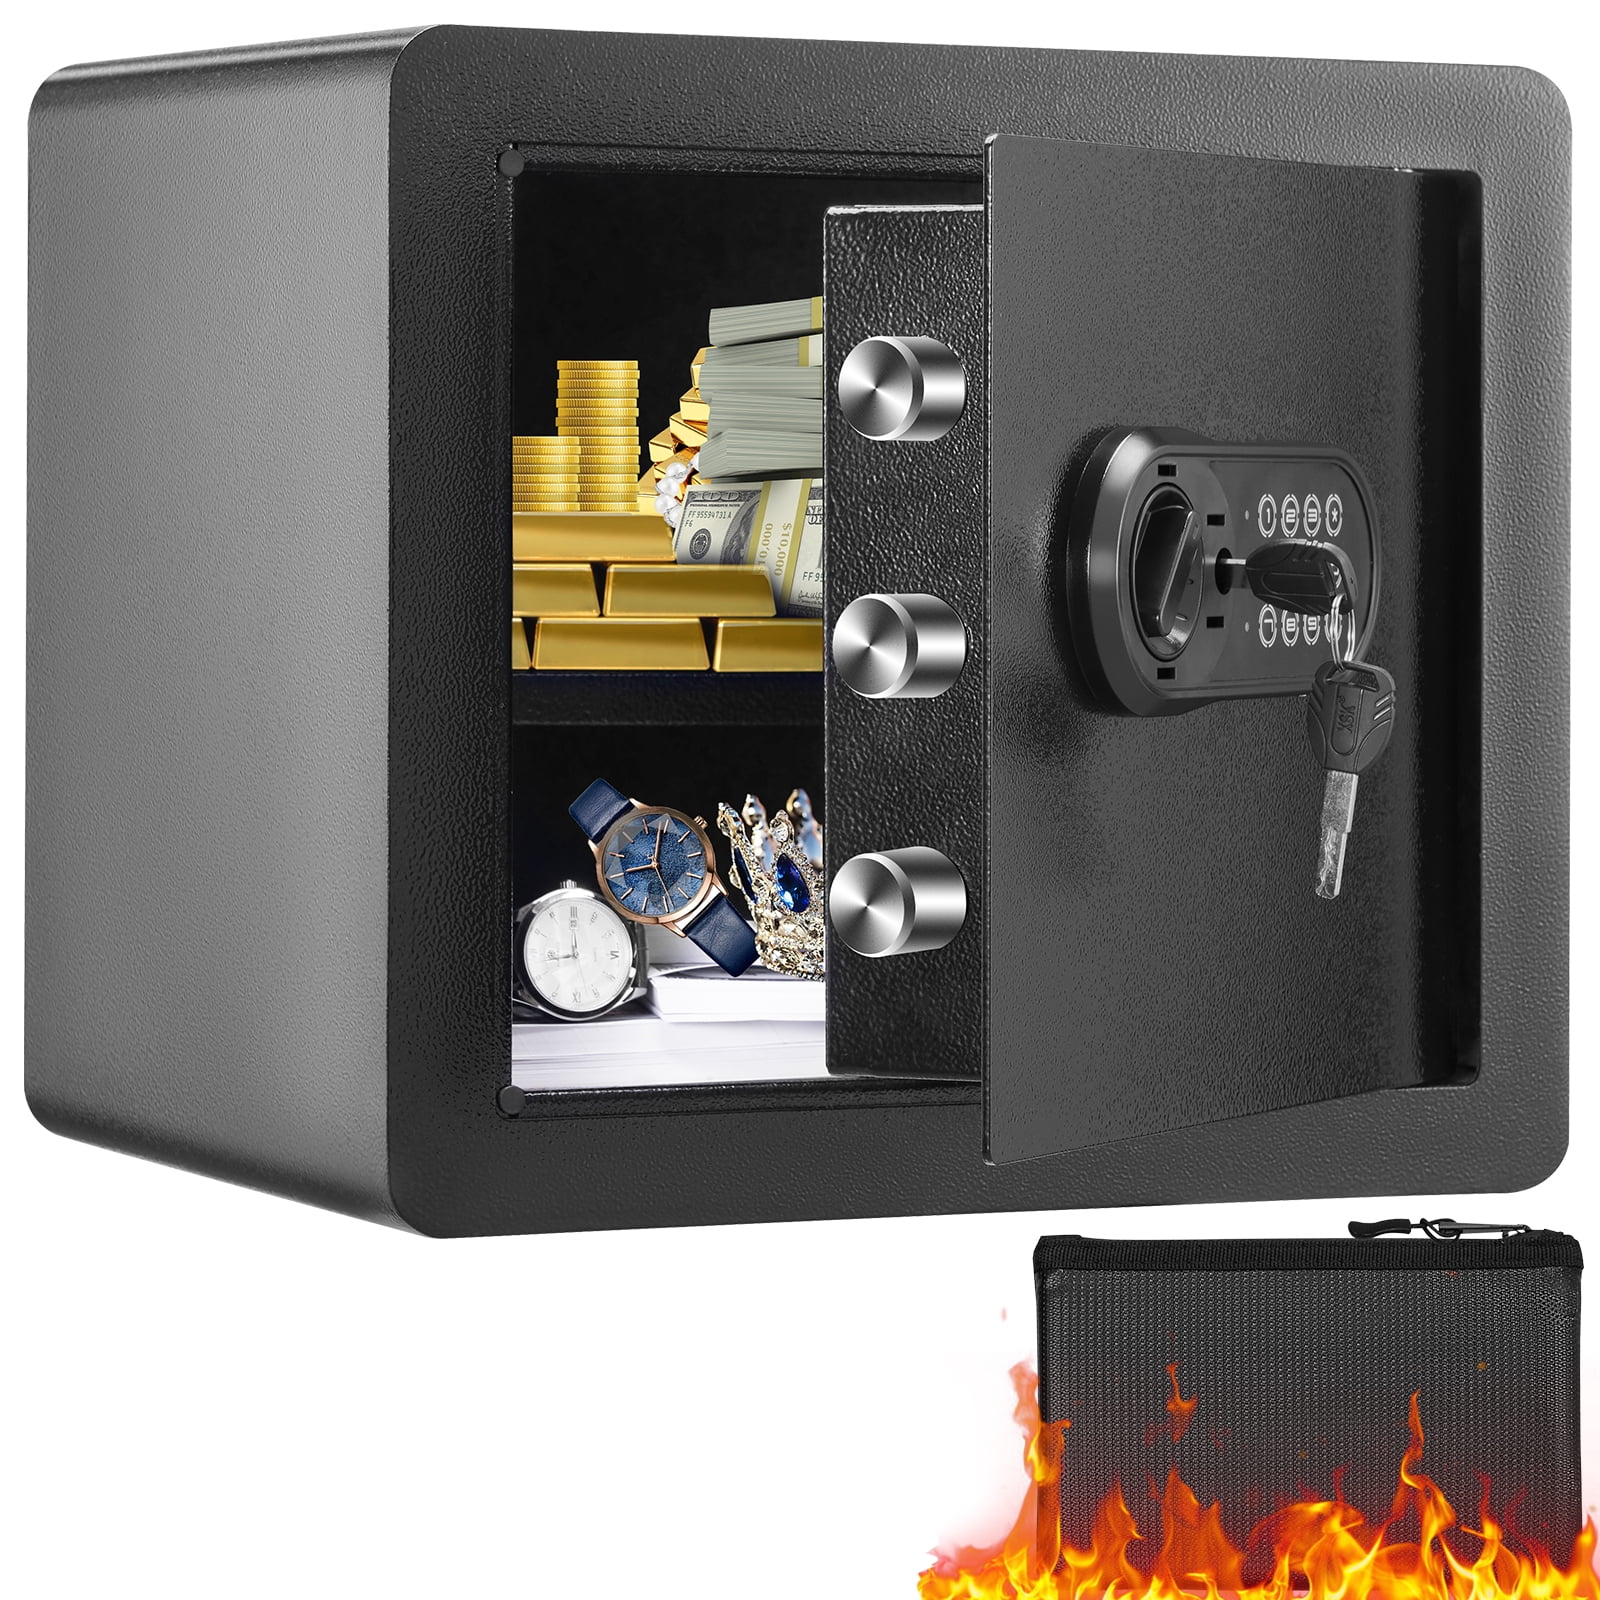 VEVORbrand Security Safe Box 1 CU.FT Money Safe with Fingerprint Lock and Key  Lock, Alloy Steel Safes with 2 Keys, Wall-Mounted Security Safe for Cash,  Jewelry, Passports, Documents, Black 